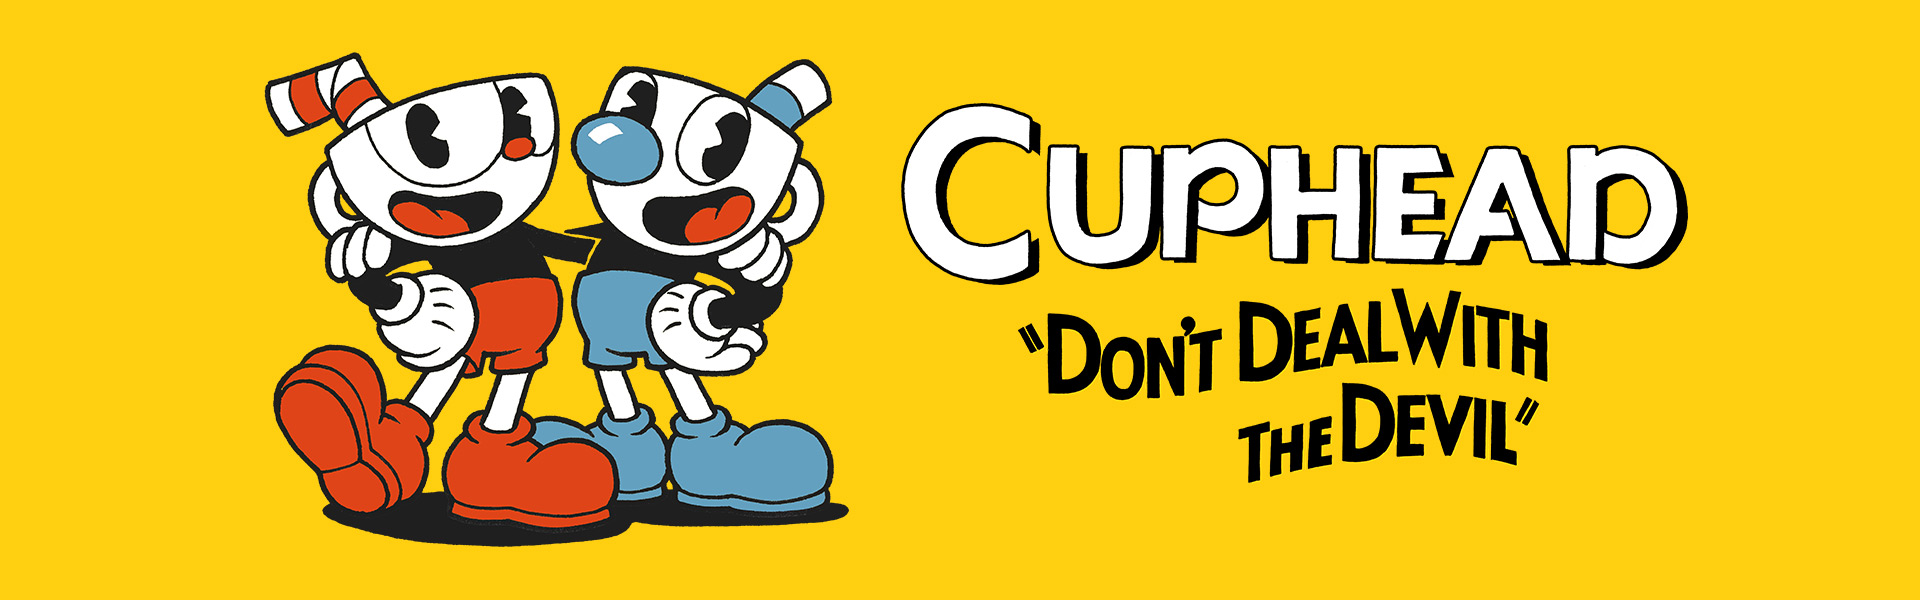 Pre Order Cuphead For Xbox One And Windows